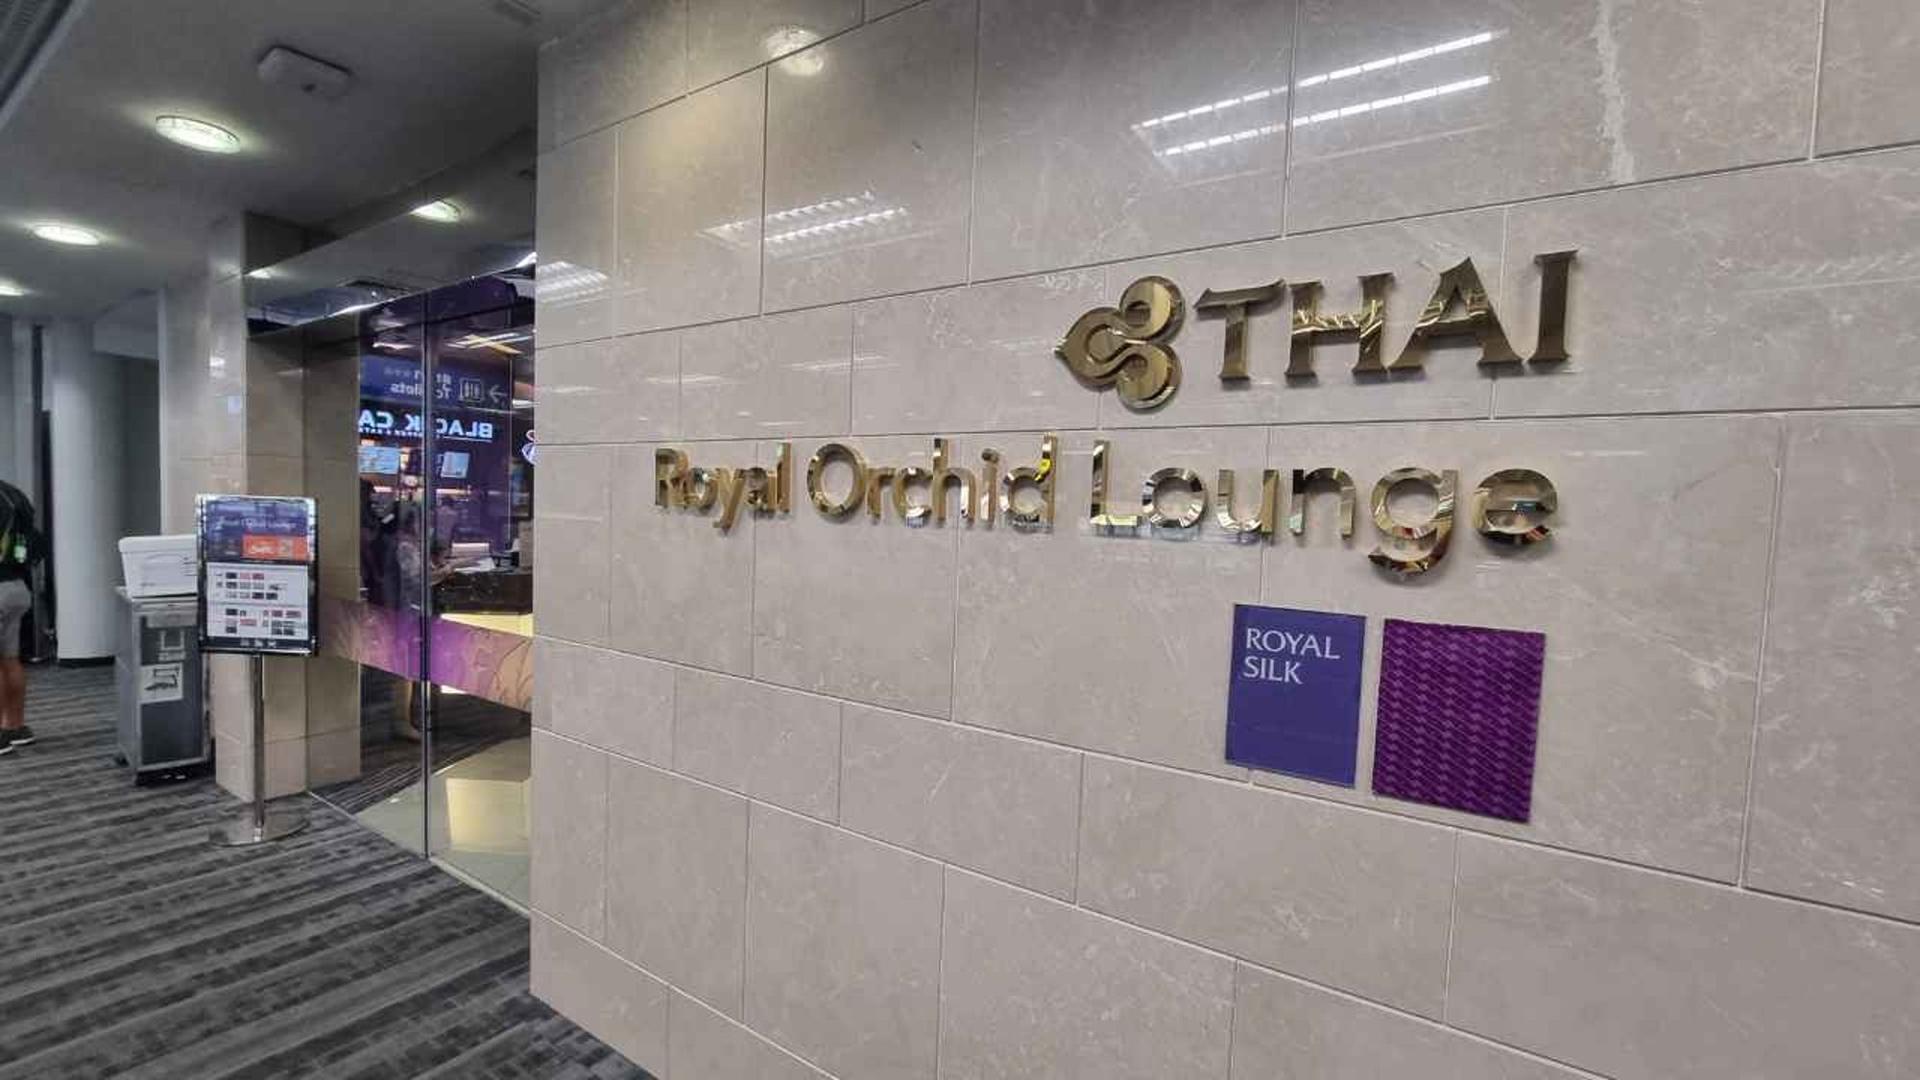 Thai Airways Royal Orchid Lounge image 20 of 22